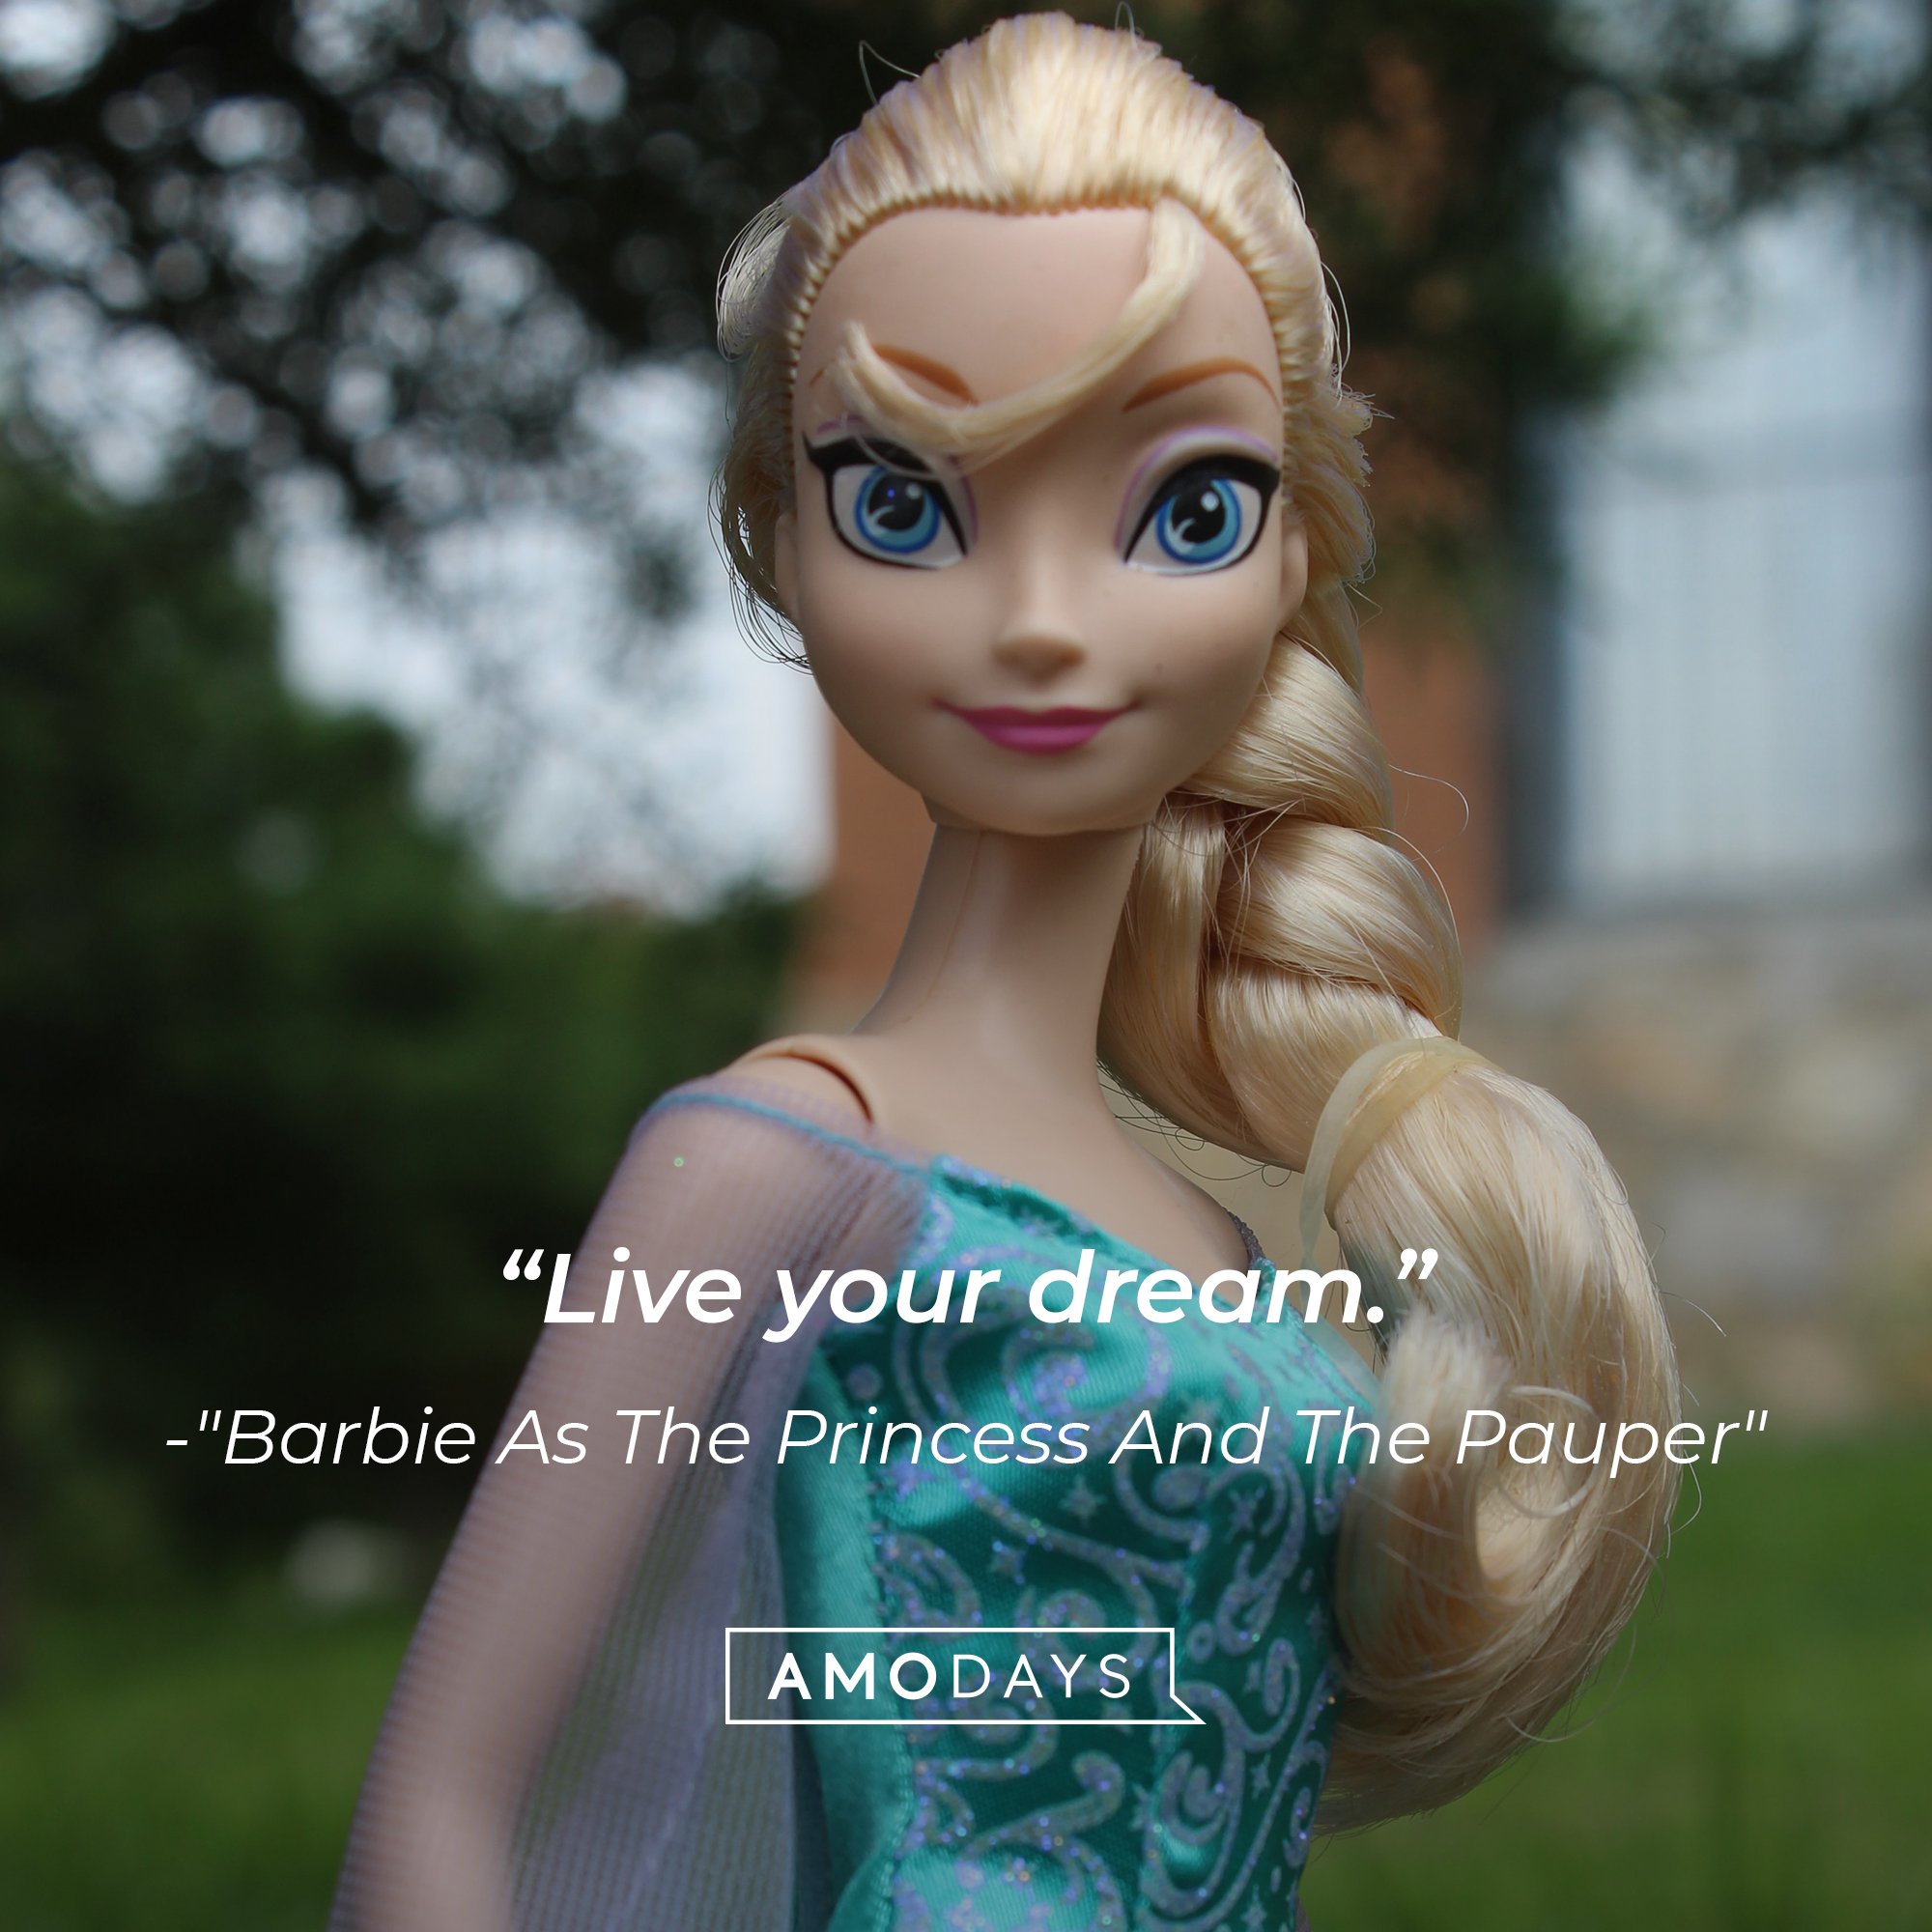 "Barbie As The Princess And The Pauper's" quote: "Live your dream." | Image: AmoDays